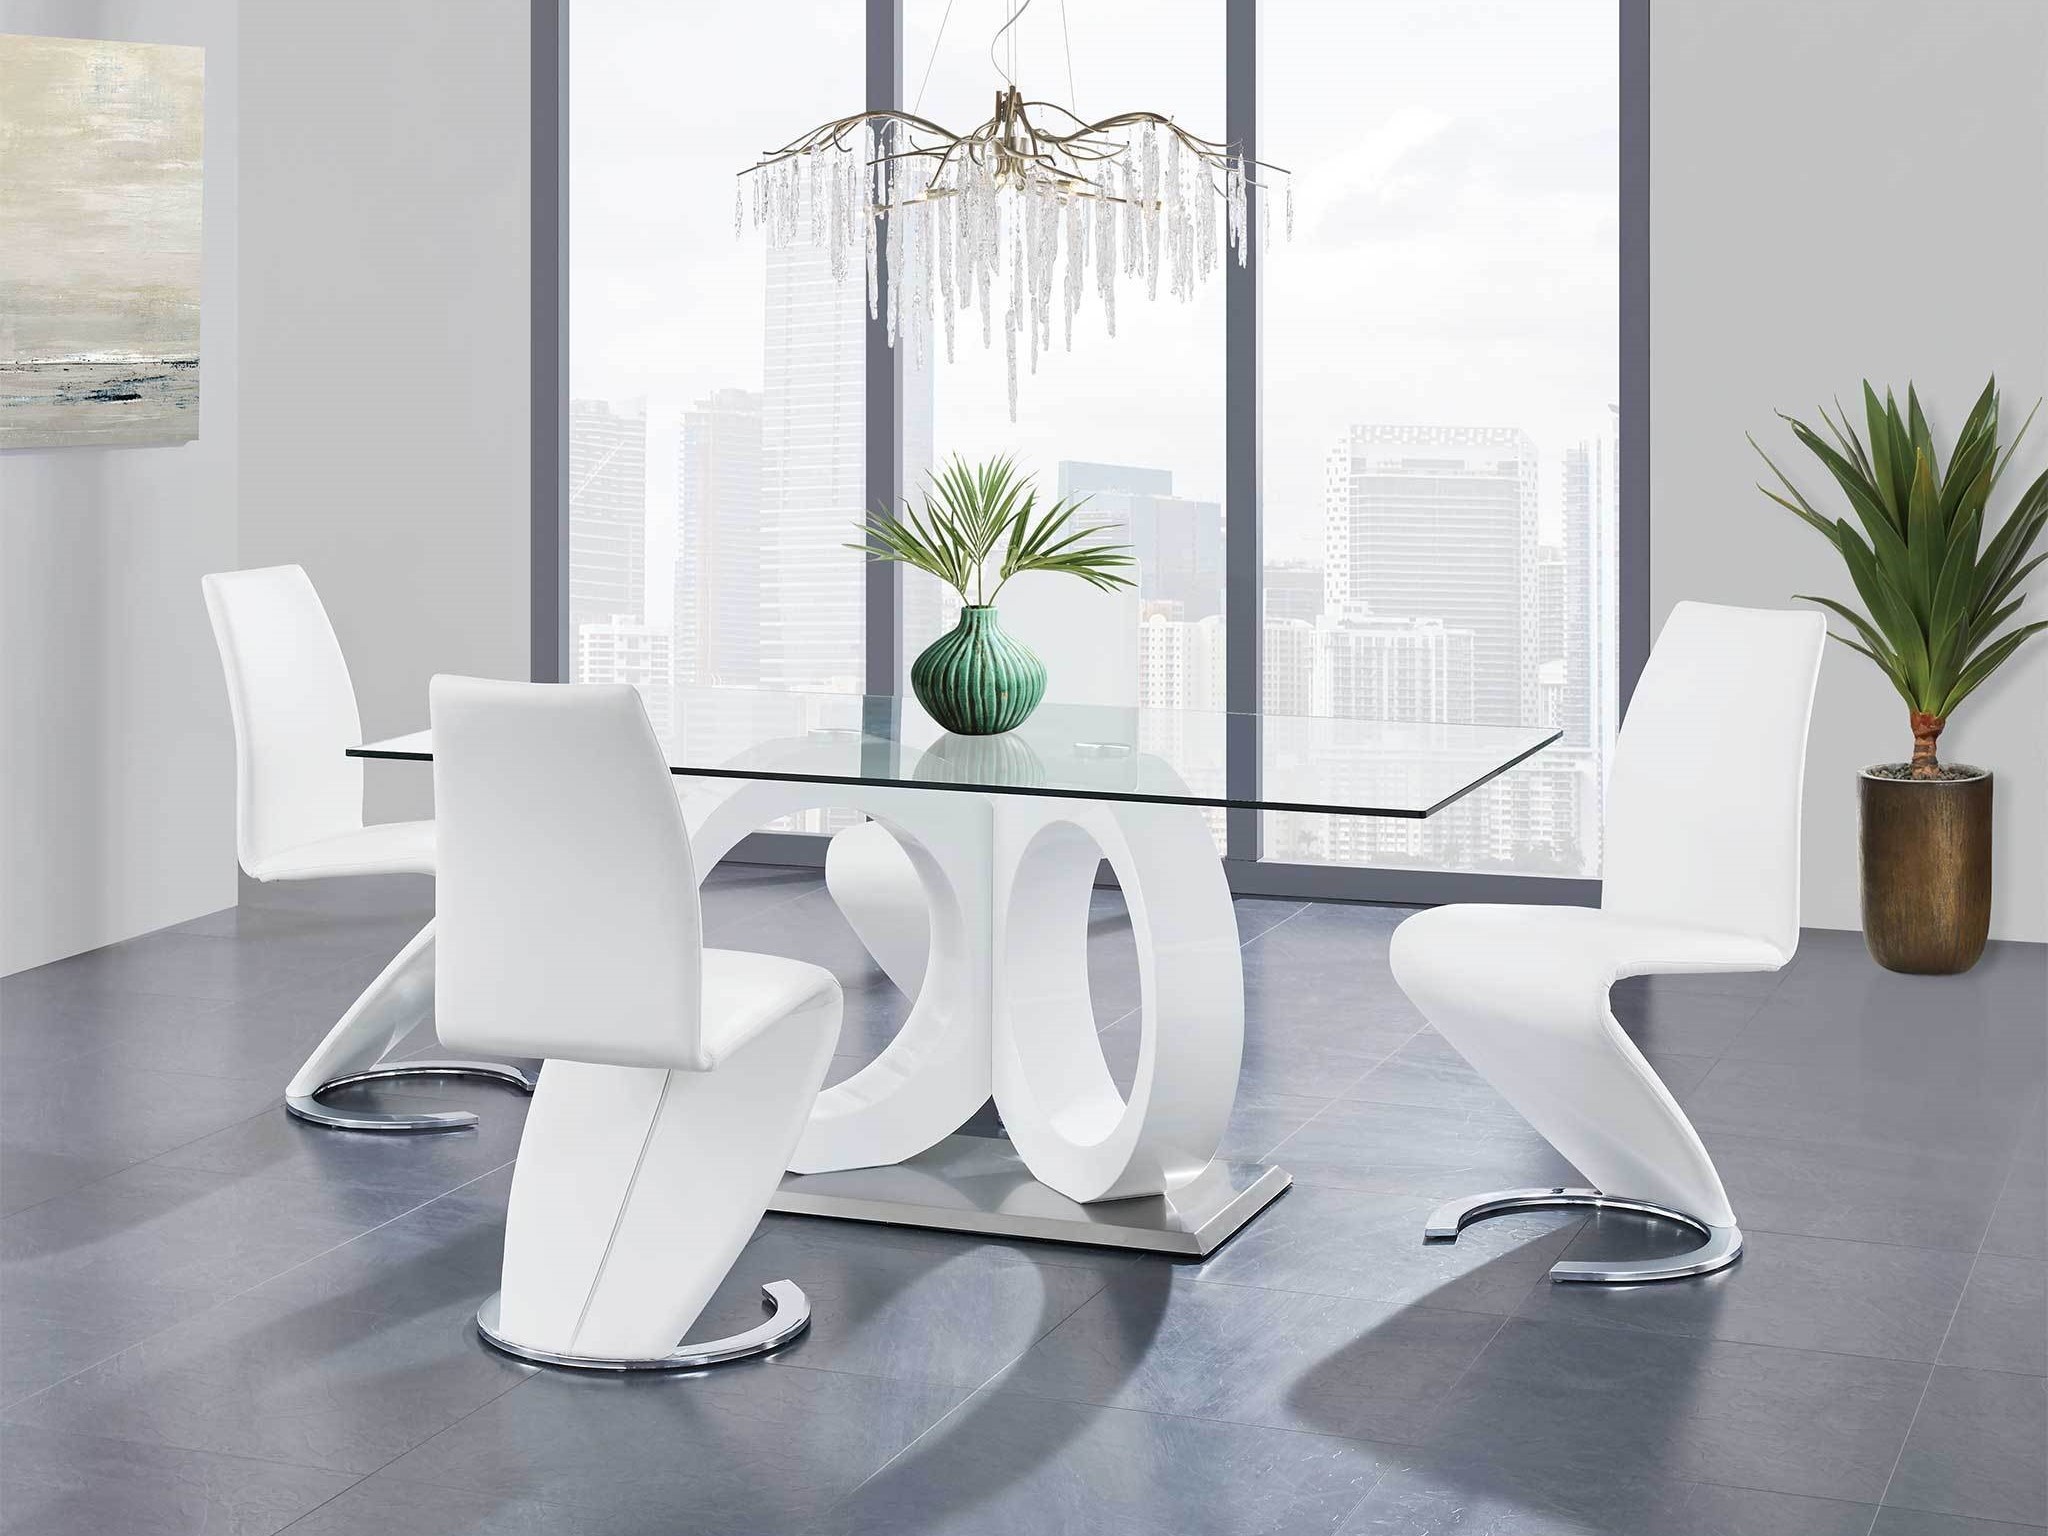 Modern Dining Table
D9002DT